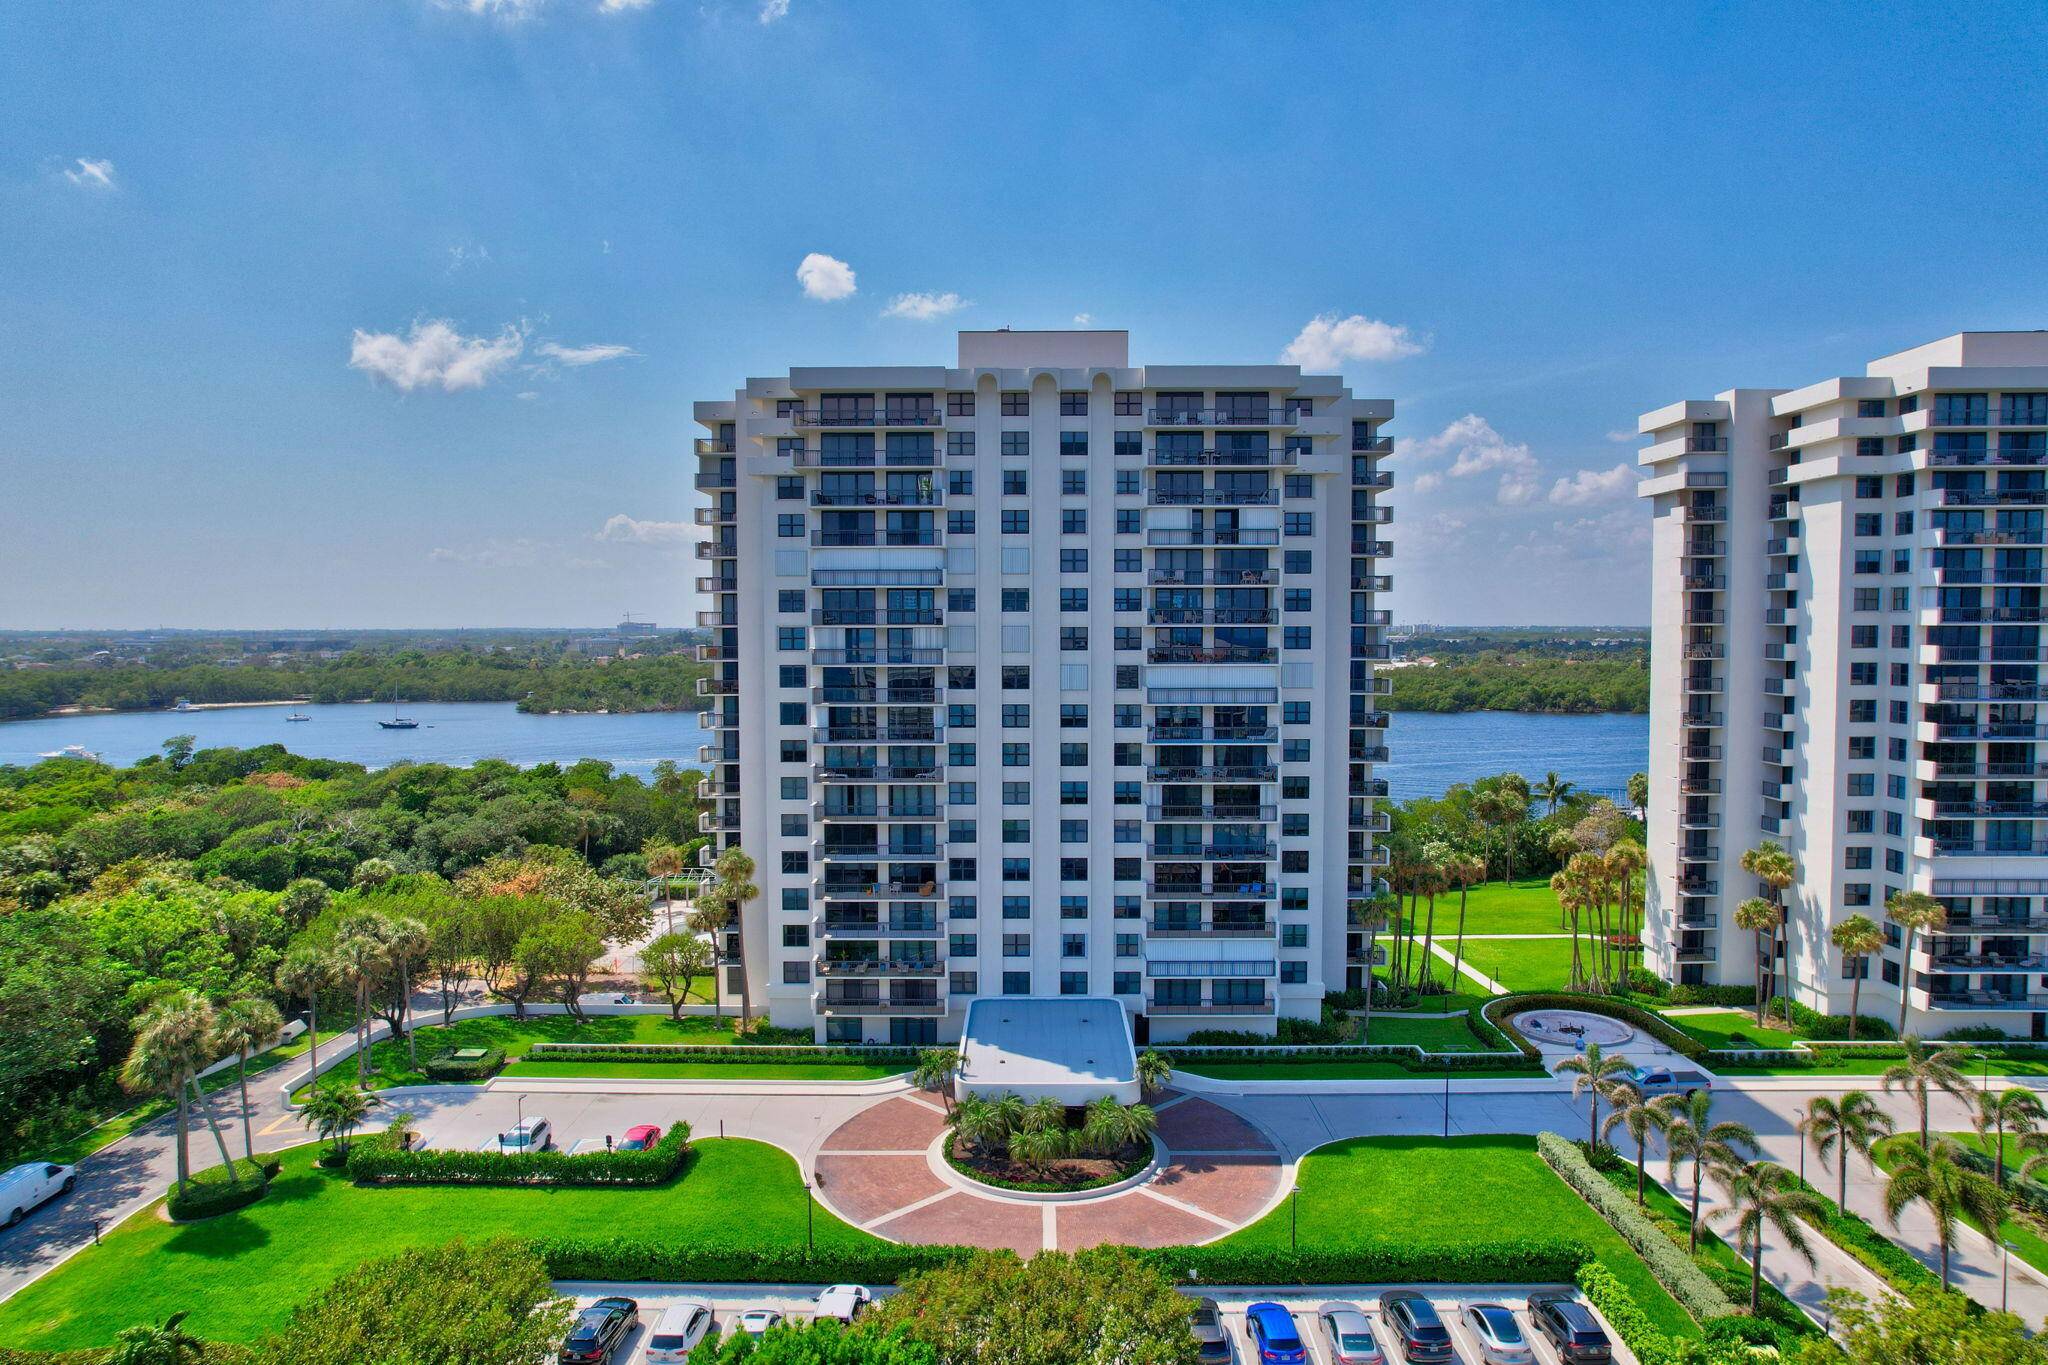 DON'T MISS THIS RARE OPPORTUNITY TO OWN A 16TH FLOOR, CORNER UNIT WHICH FEATURES TWO BALCONIES, ONE WITH PANORAMIC VIEWS OF THE INTRACOASTAL AND ANOTHER WITH OCEAN VIEWS !